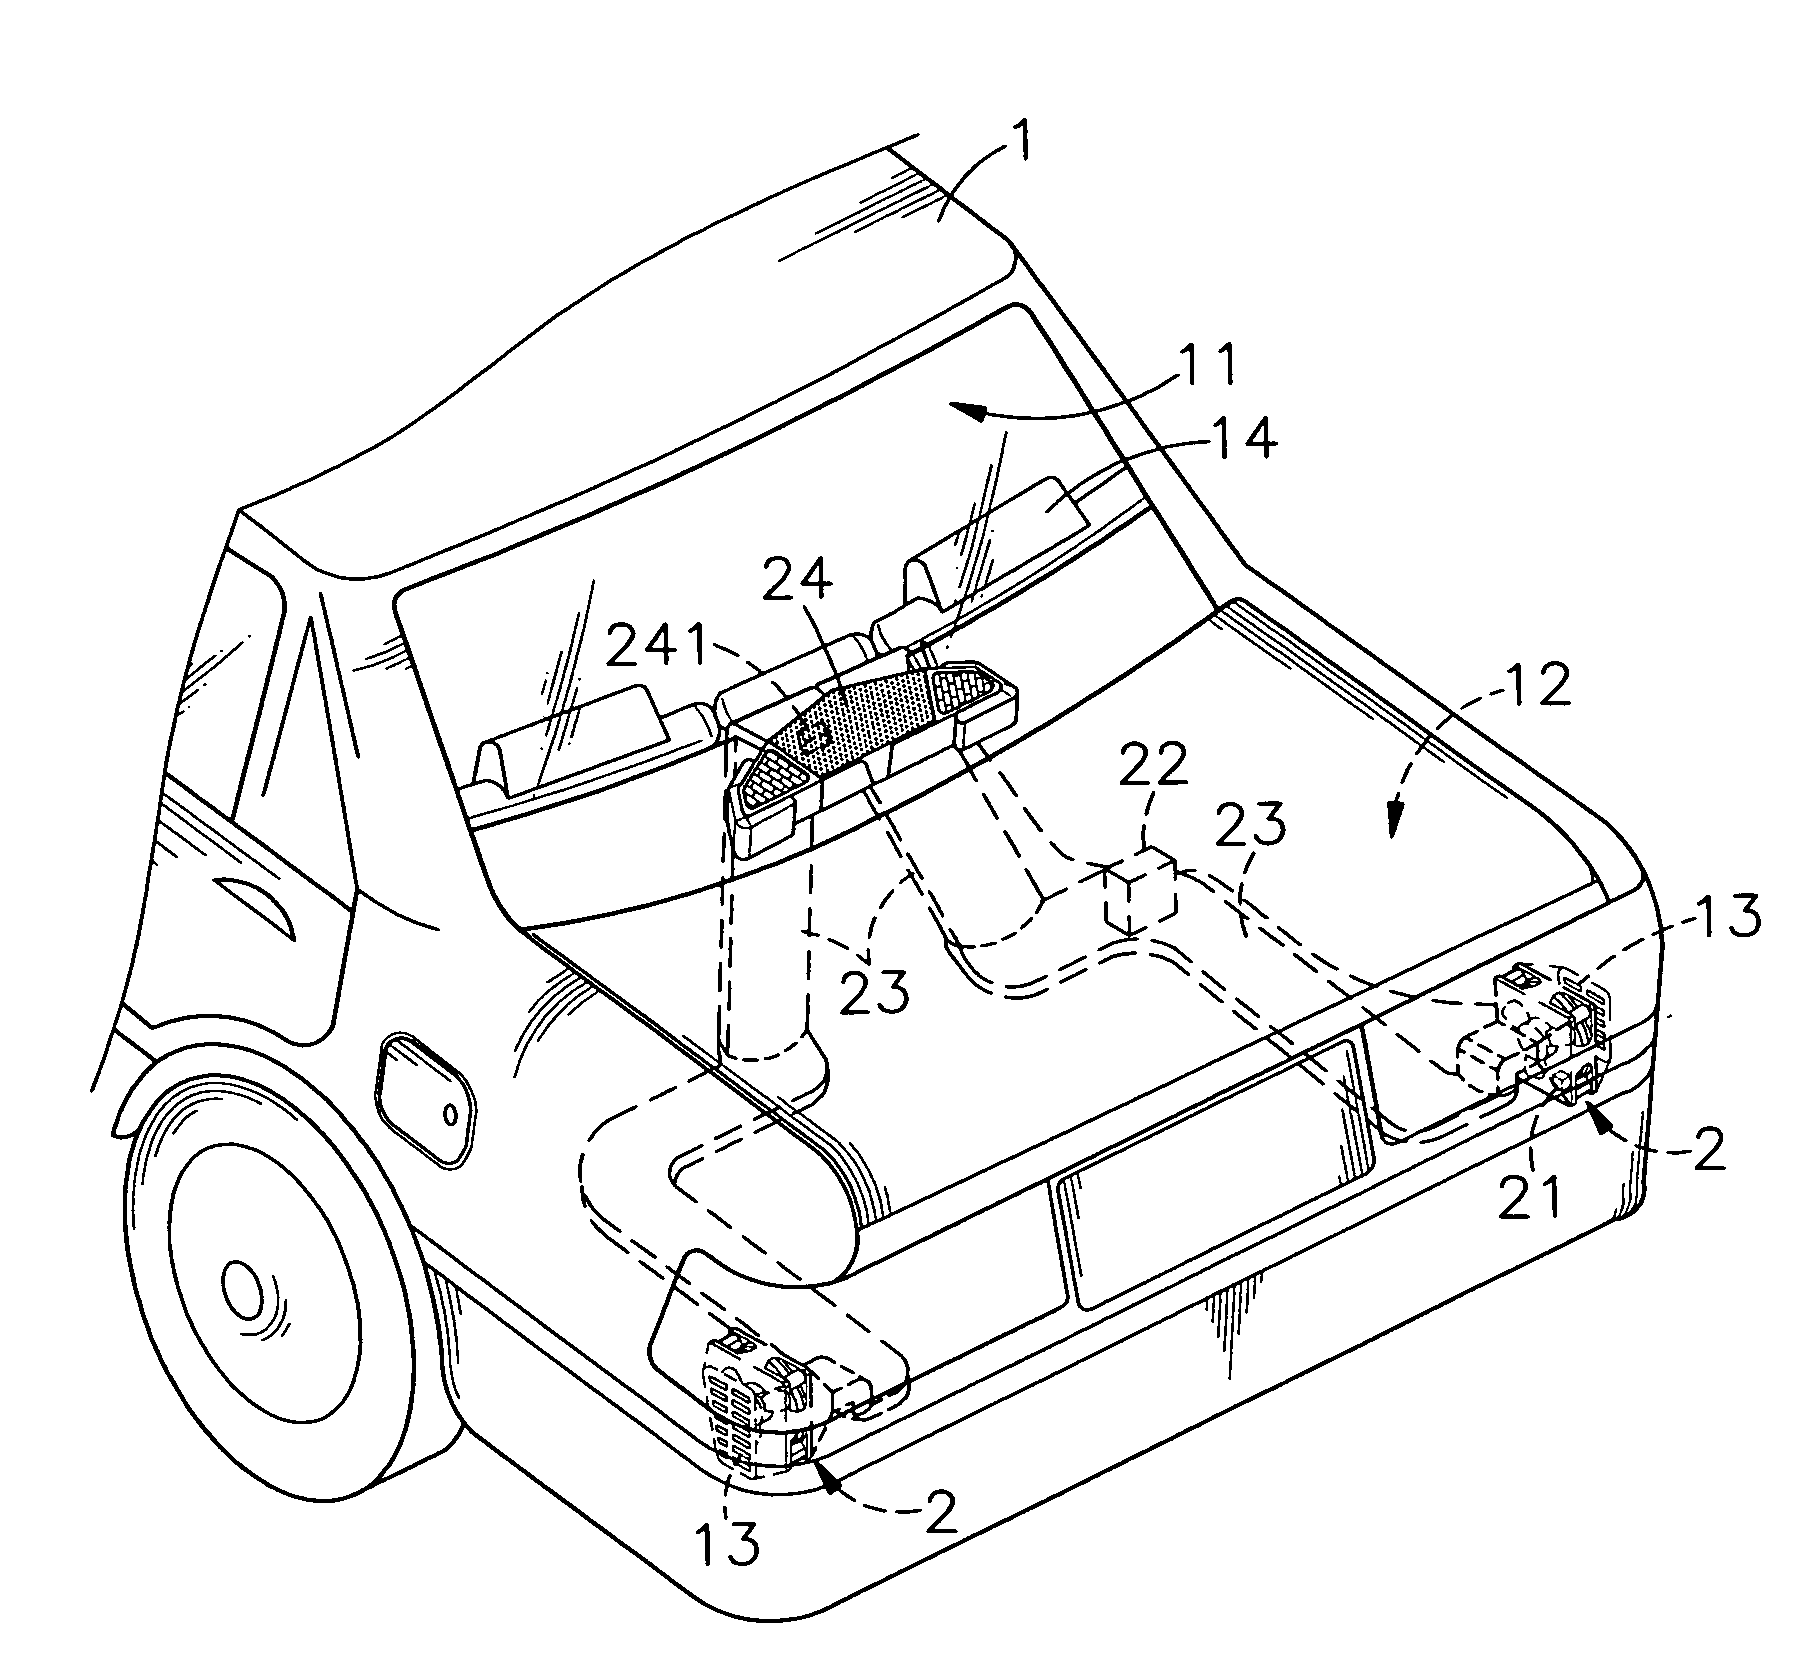 Motor vehicle air cooling method and system